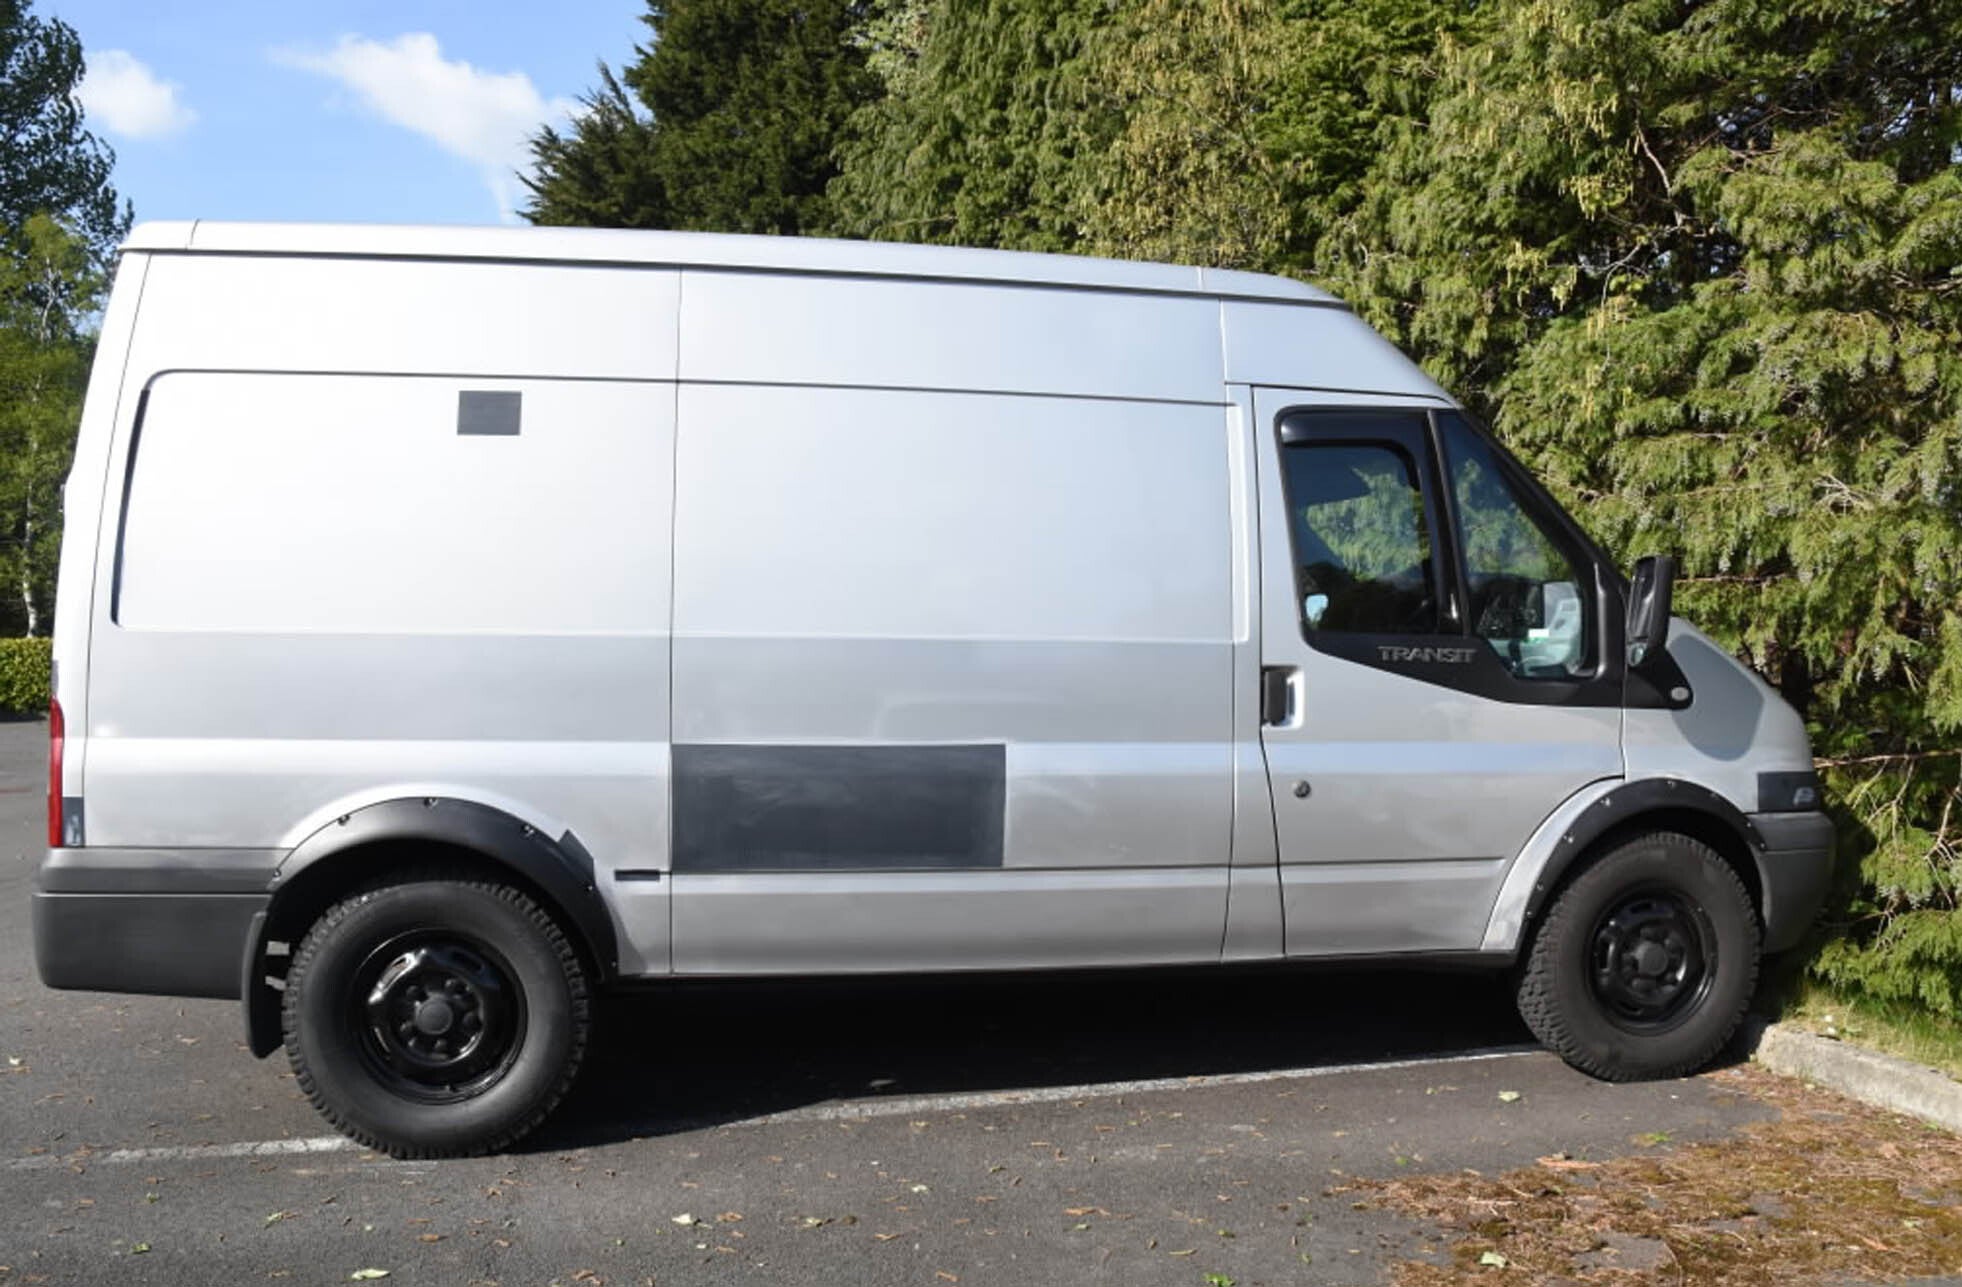 The Transit van highlighted by police (Lancashire Constabulary/PA)